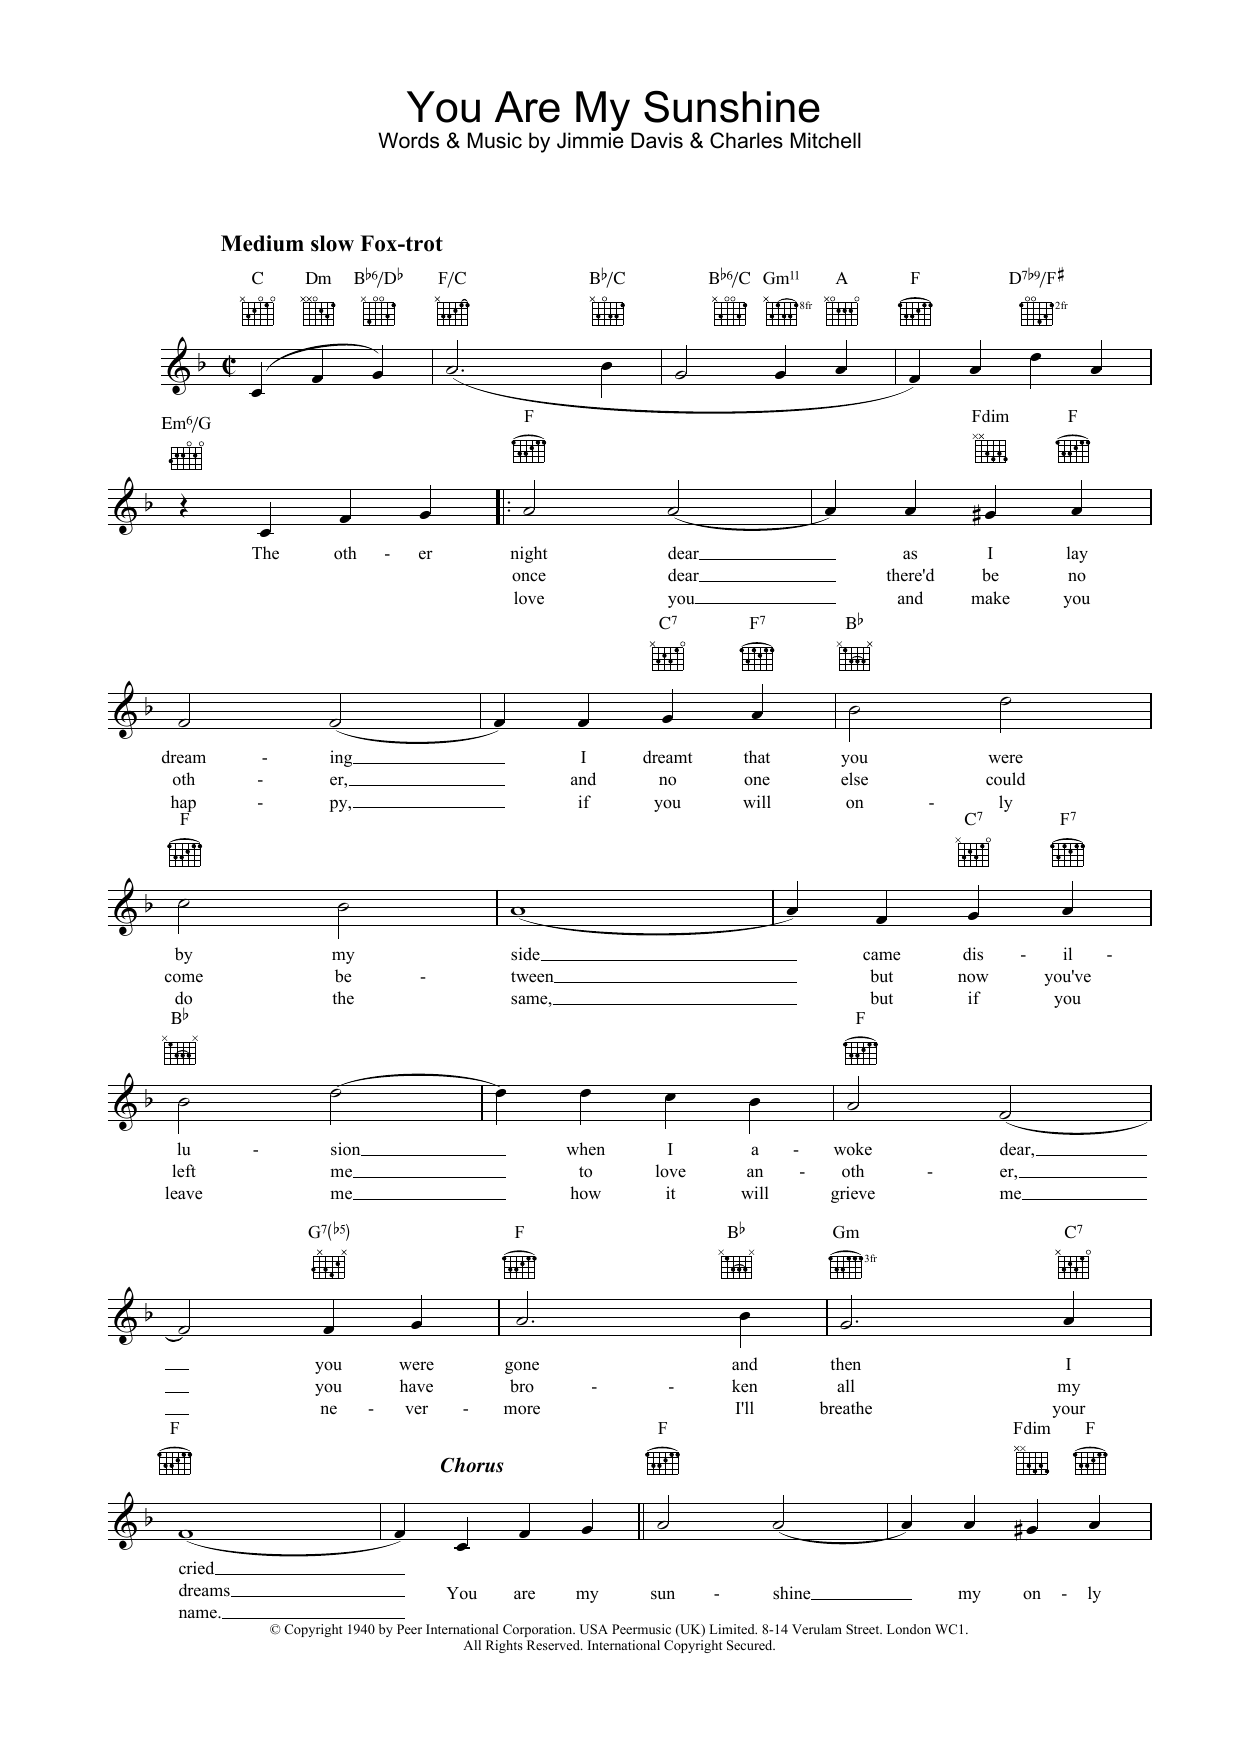 Download Bing Crosby You Are My Sunshine Sheet Music